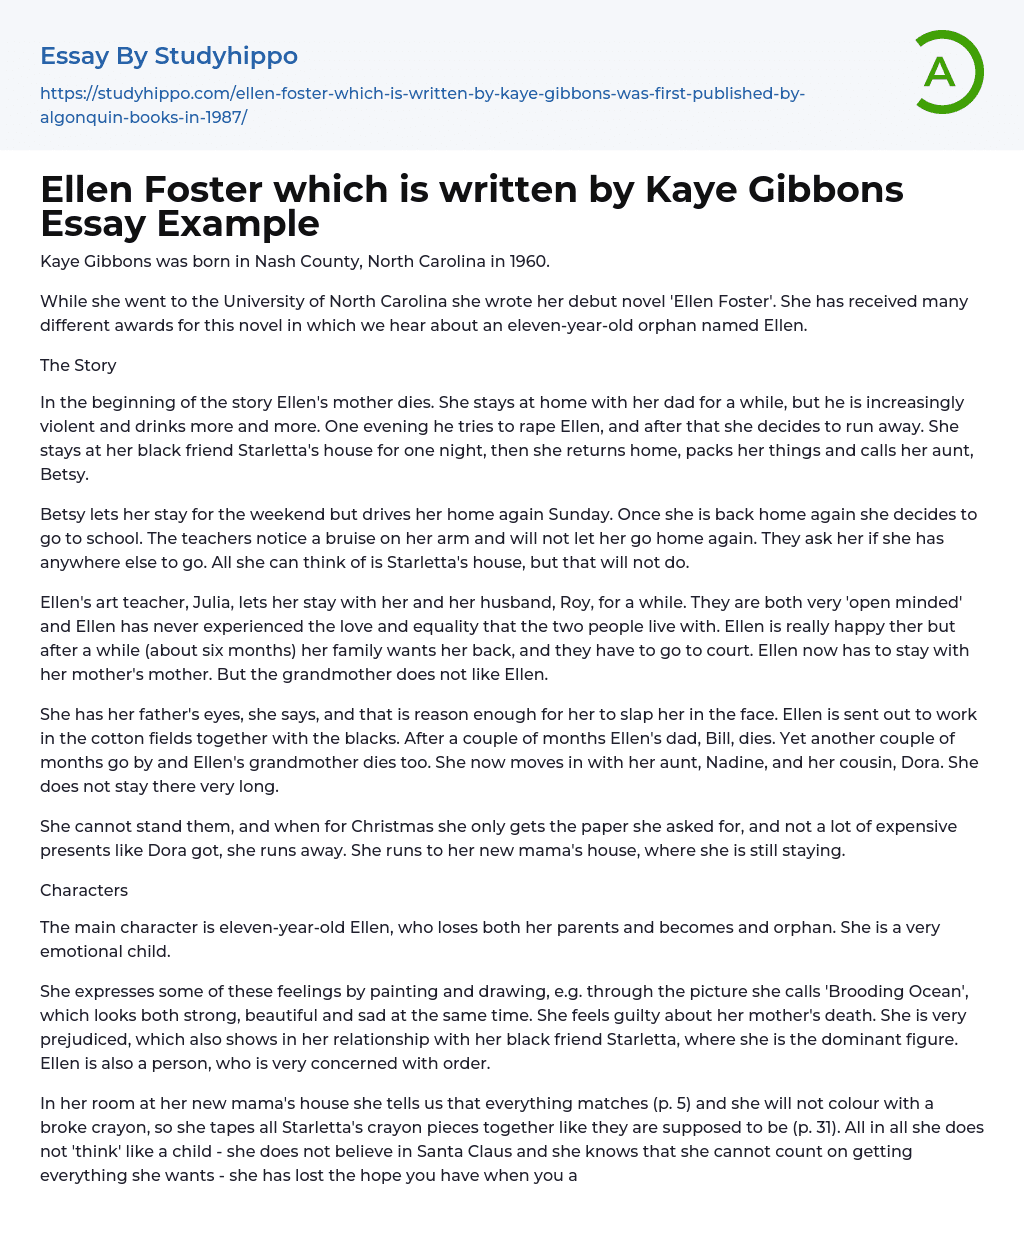 Ellen Foster which is written by Kaye Gibbons Essay Example